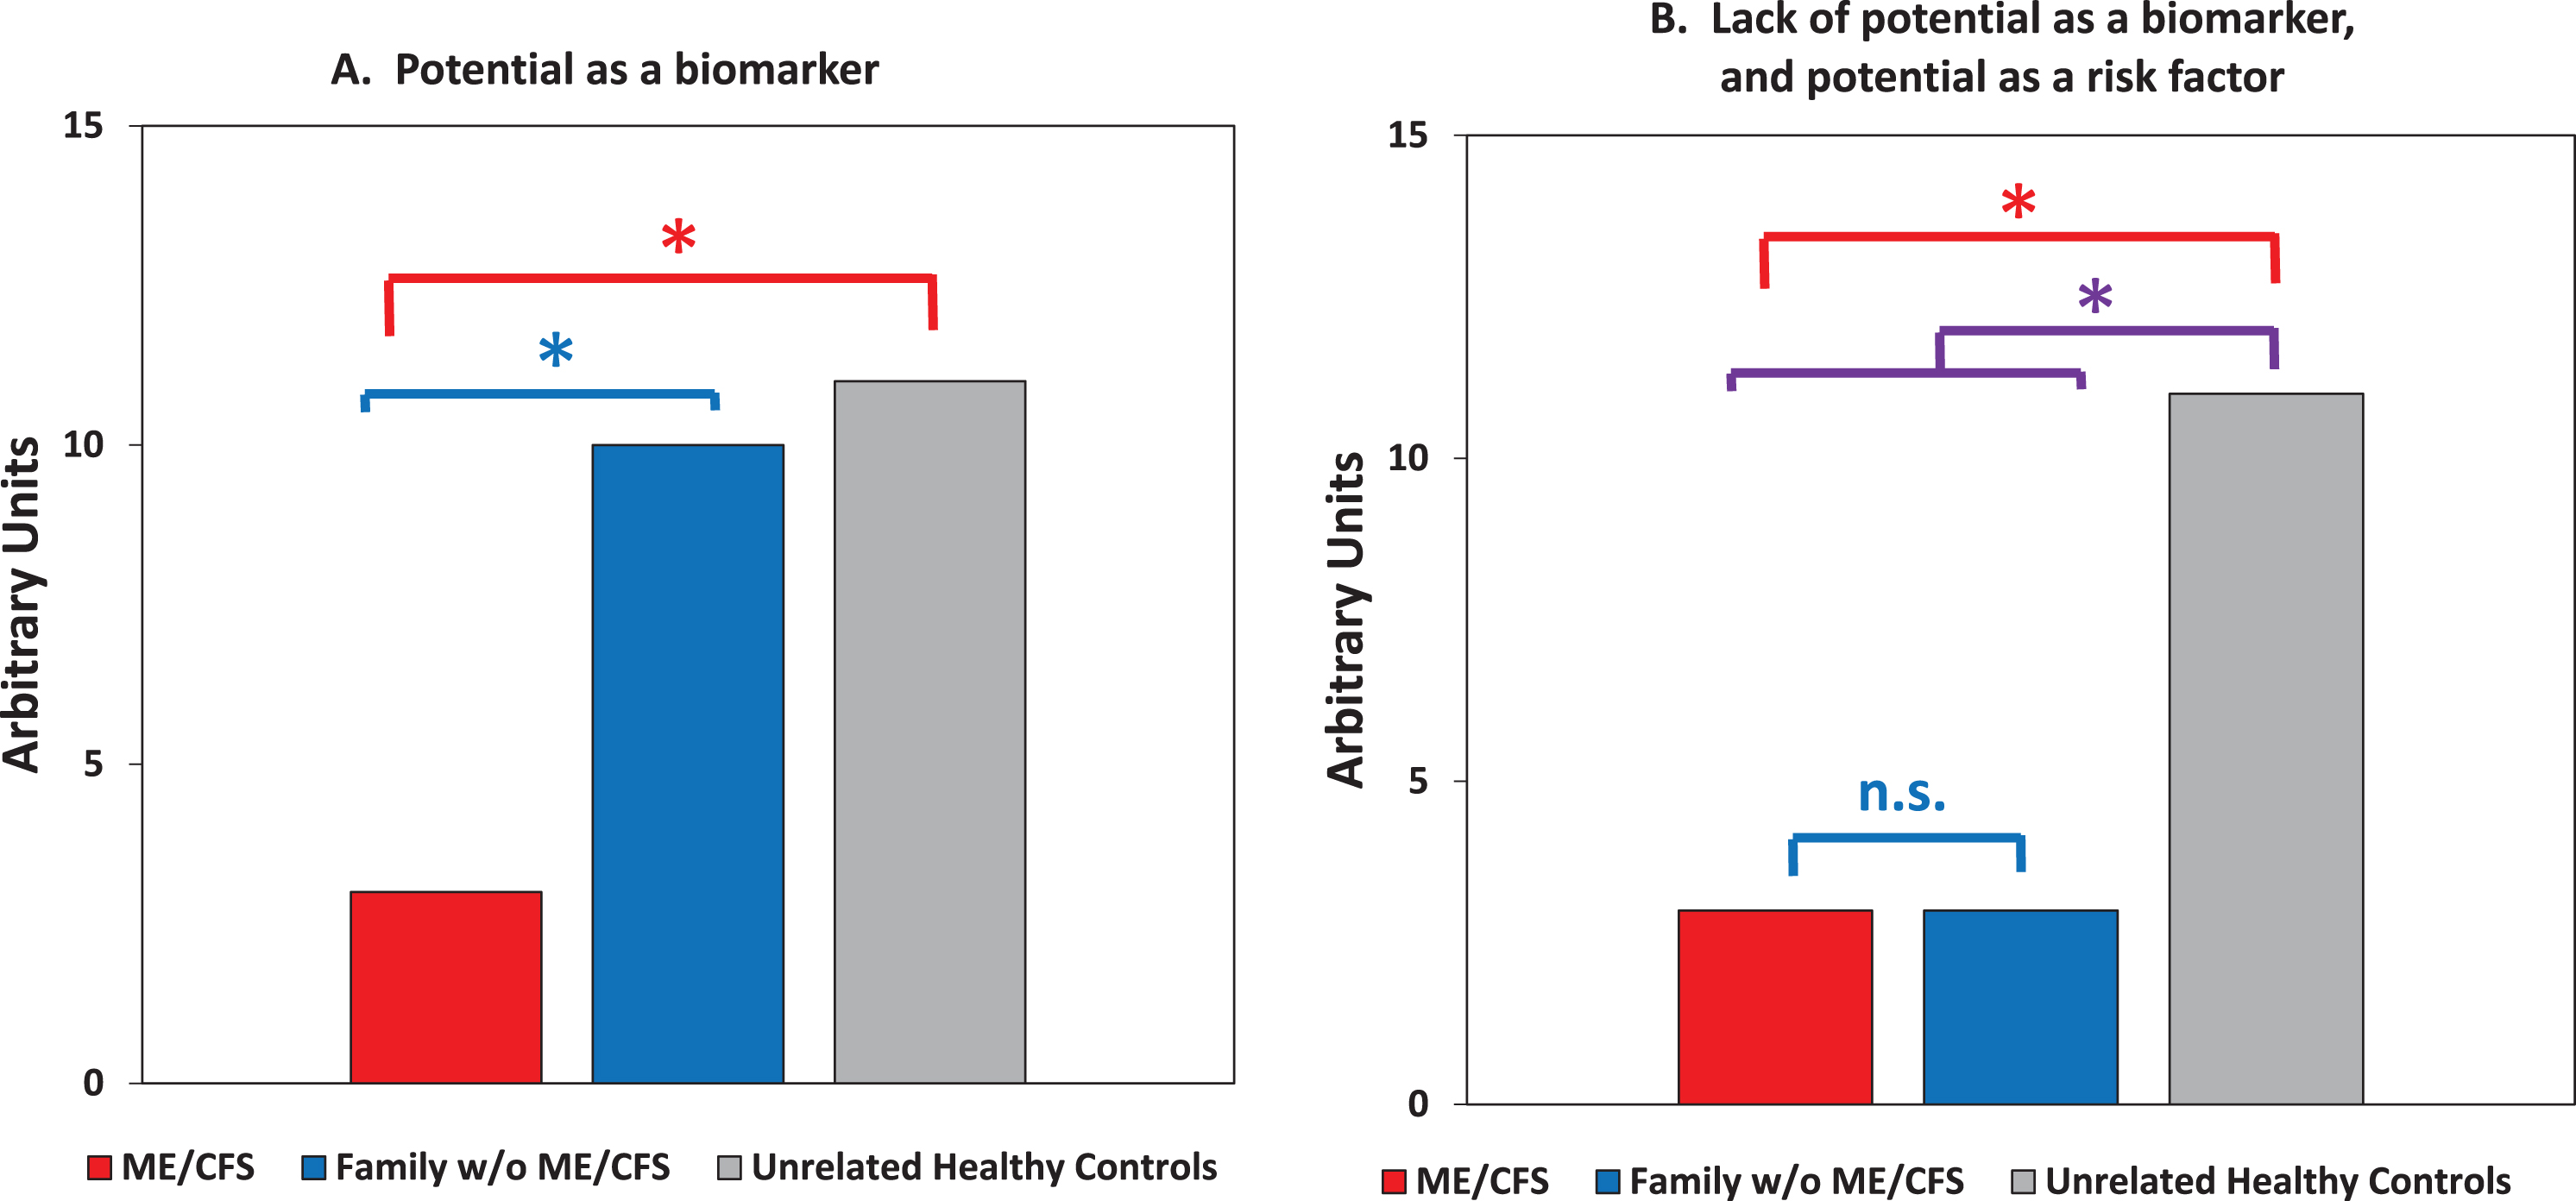 A guide for detection of diagnostic biomarkers vs. risk factors when there is inclusion of unaffected family members as a second group of controls. Asterisks indicate expected statistically significant differences, with P < 0.05. A. Expected data consistent with potential as a biomarker. The differences between patients vs. the first degree relatives without ME/CFS must be significant, as are the differences between patients vs. matched unrelated healthy controls. B. Expected data eliminating consideration as a disease-specific biomarker but consistent with potential as a risk factor. To be a strong candidate as a risk factor, the differences between patients and the first degree relatives can be marginal (as indicated) or in the same direction (higher or lower than unrelated controls). The differences between all family members (patients plus unaffected family members) vs. unrelated healthy controls should be significant.